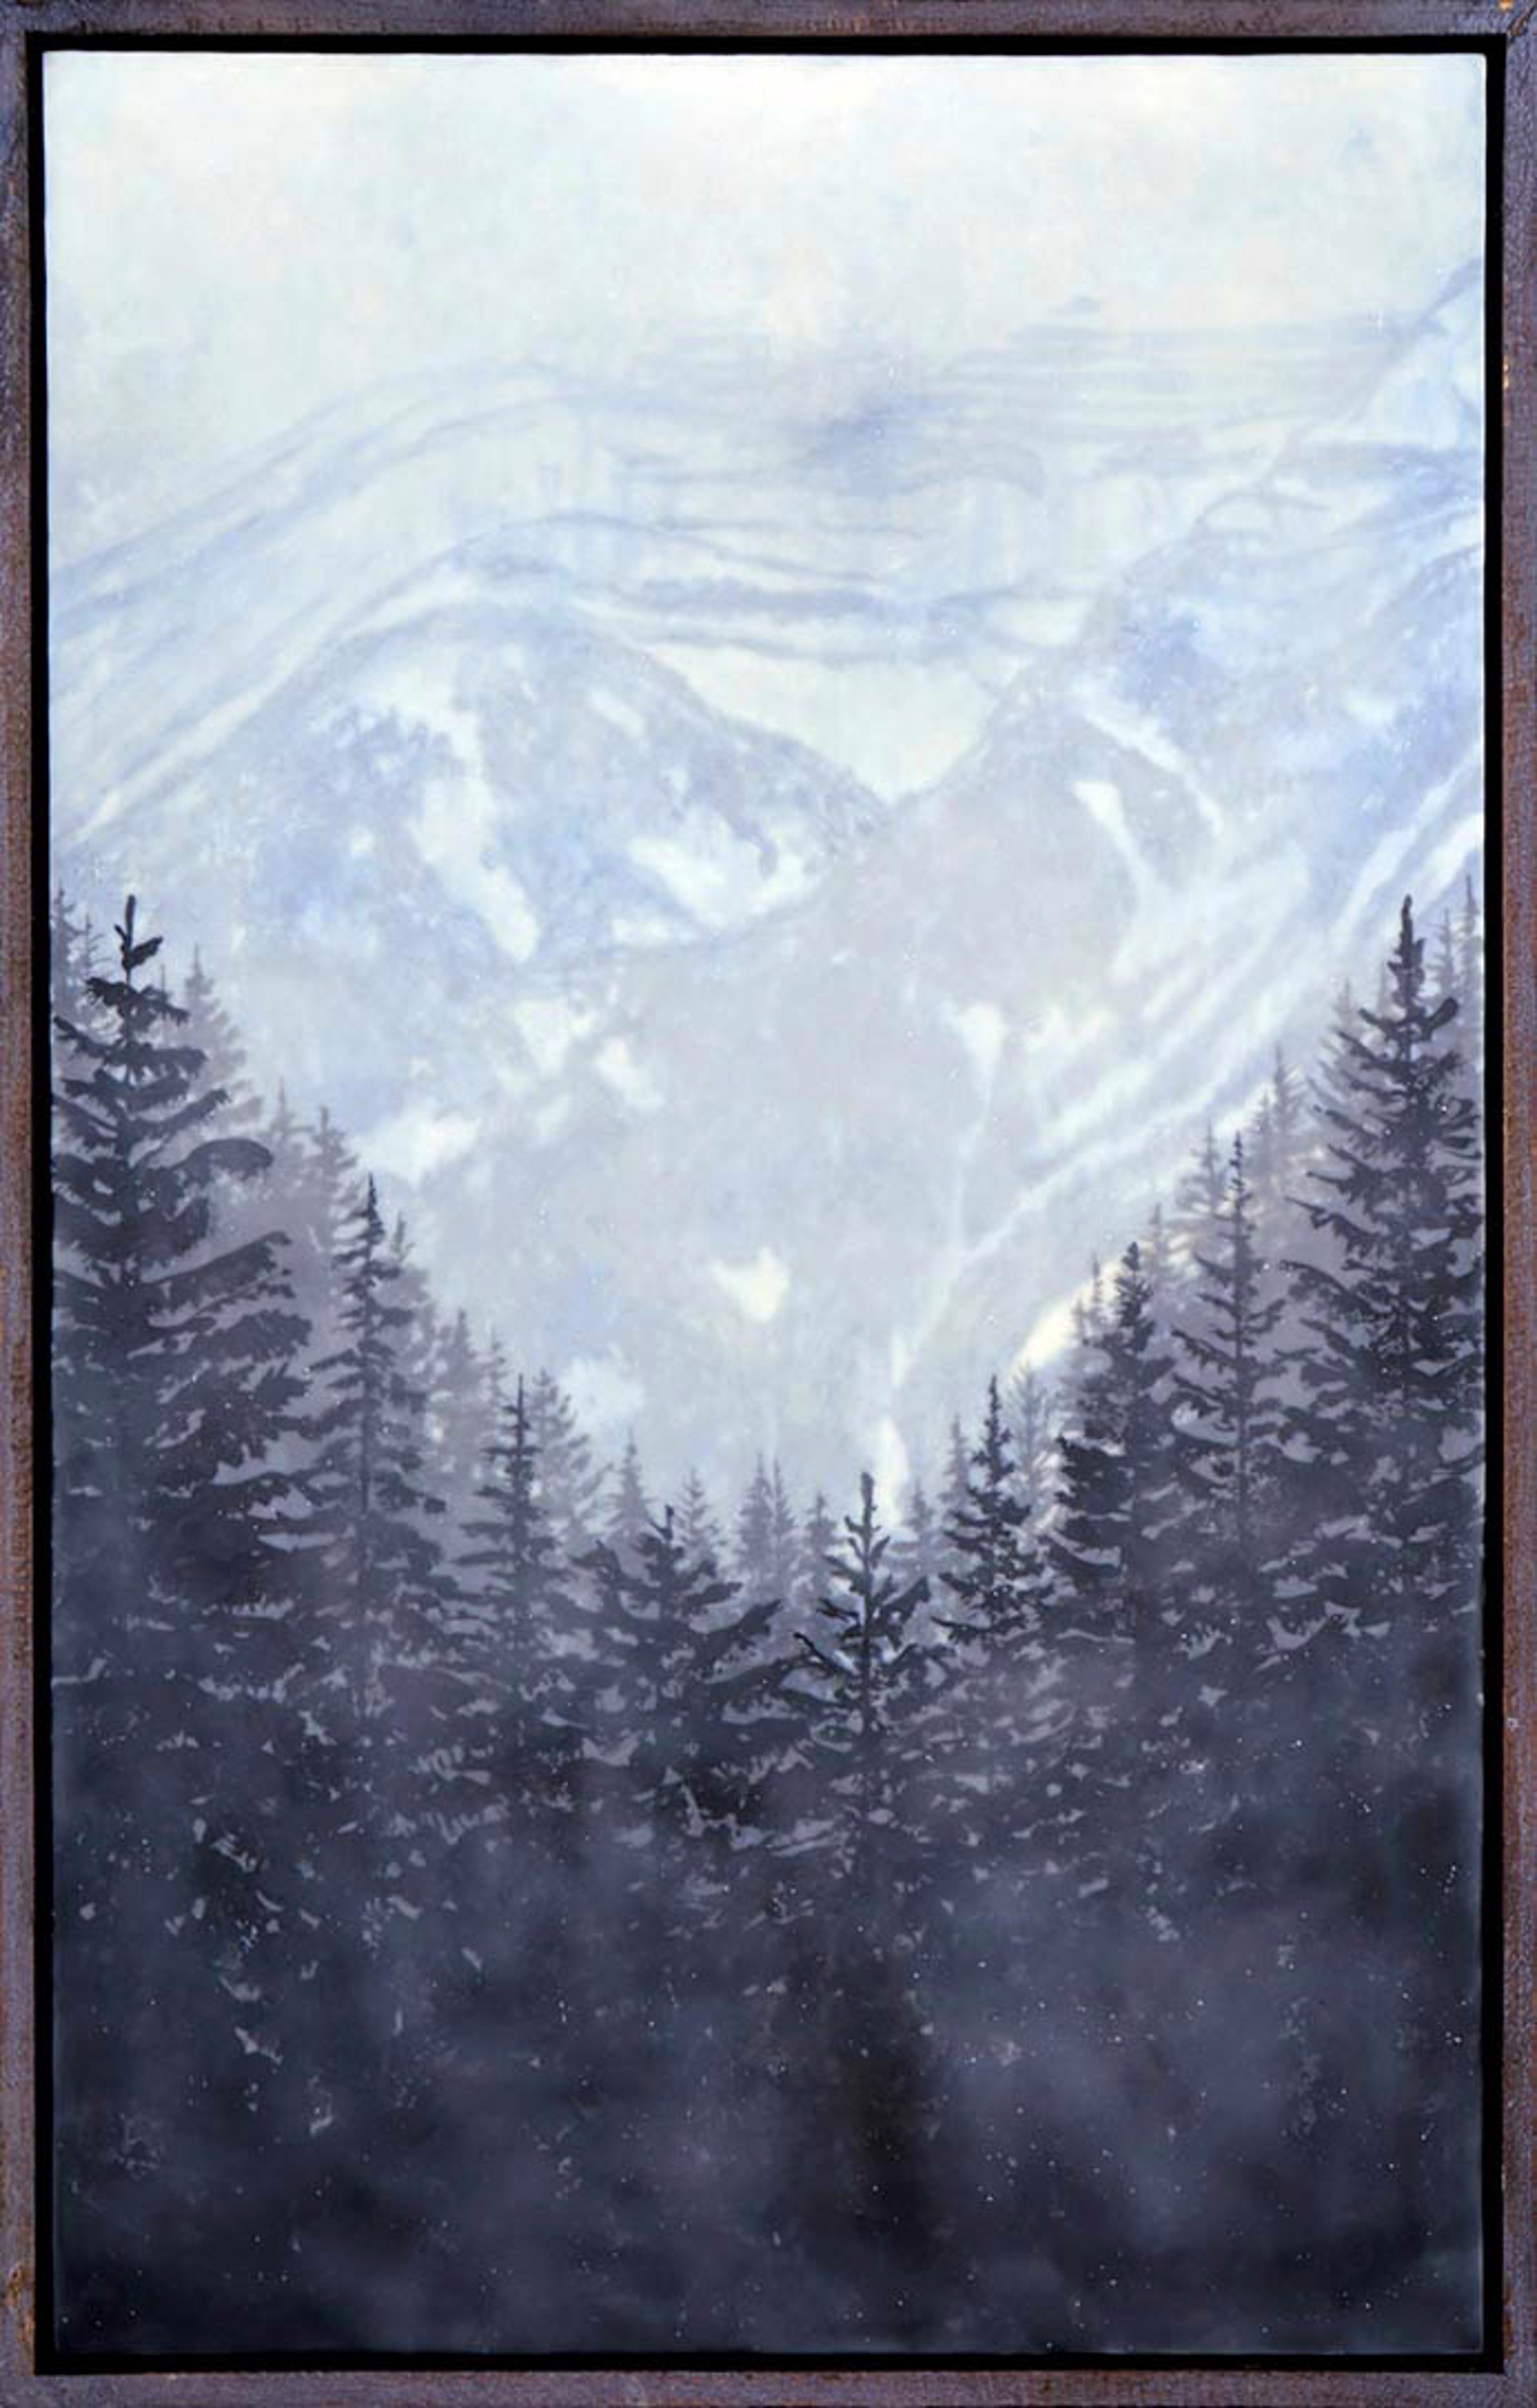 Original Encaustic Painting By Bridgette Meinhold Winter Scene With Big Mountains In The Background Tall Pines Surrounding Blue And White Snowy Landscape